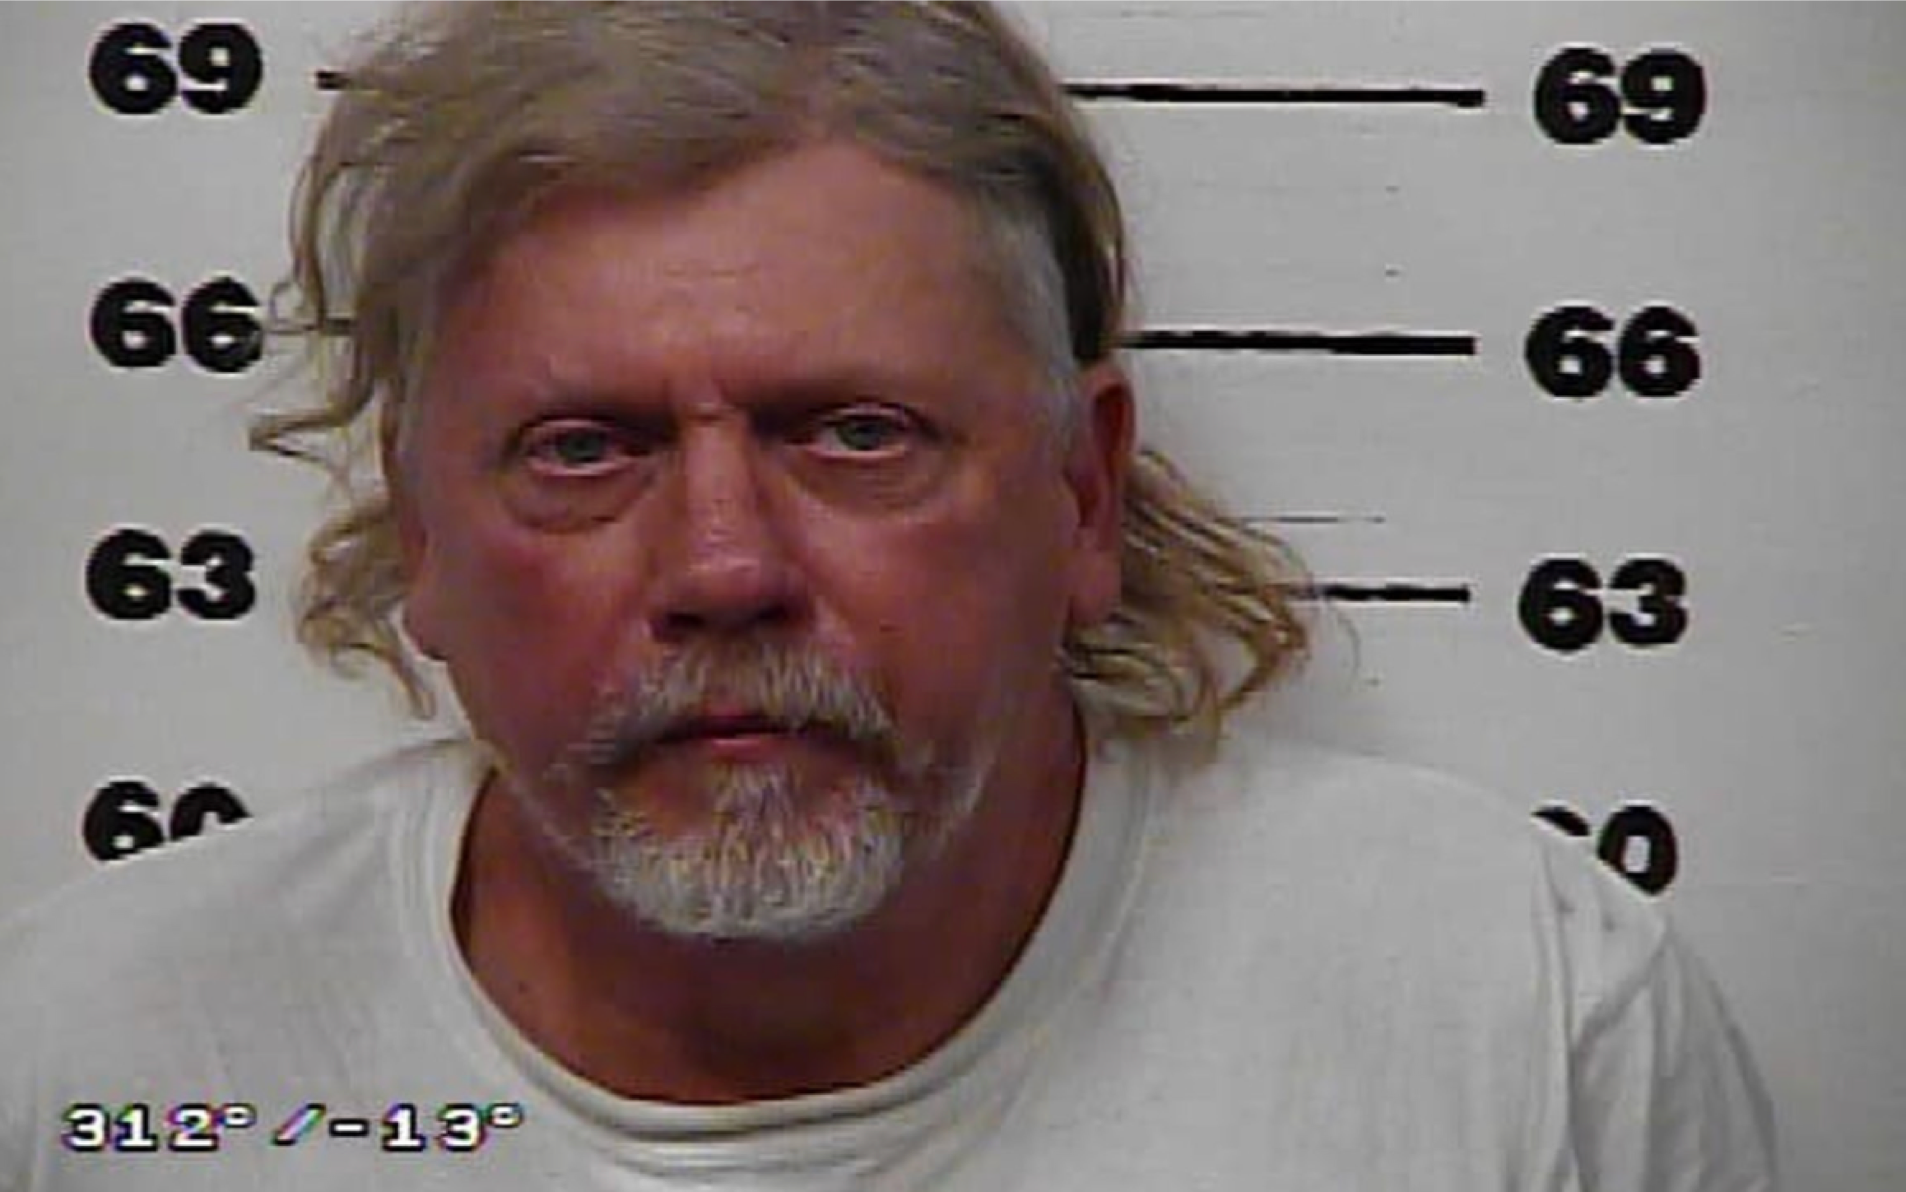 Donald Wells in his mugshot following his DUI arrest